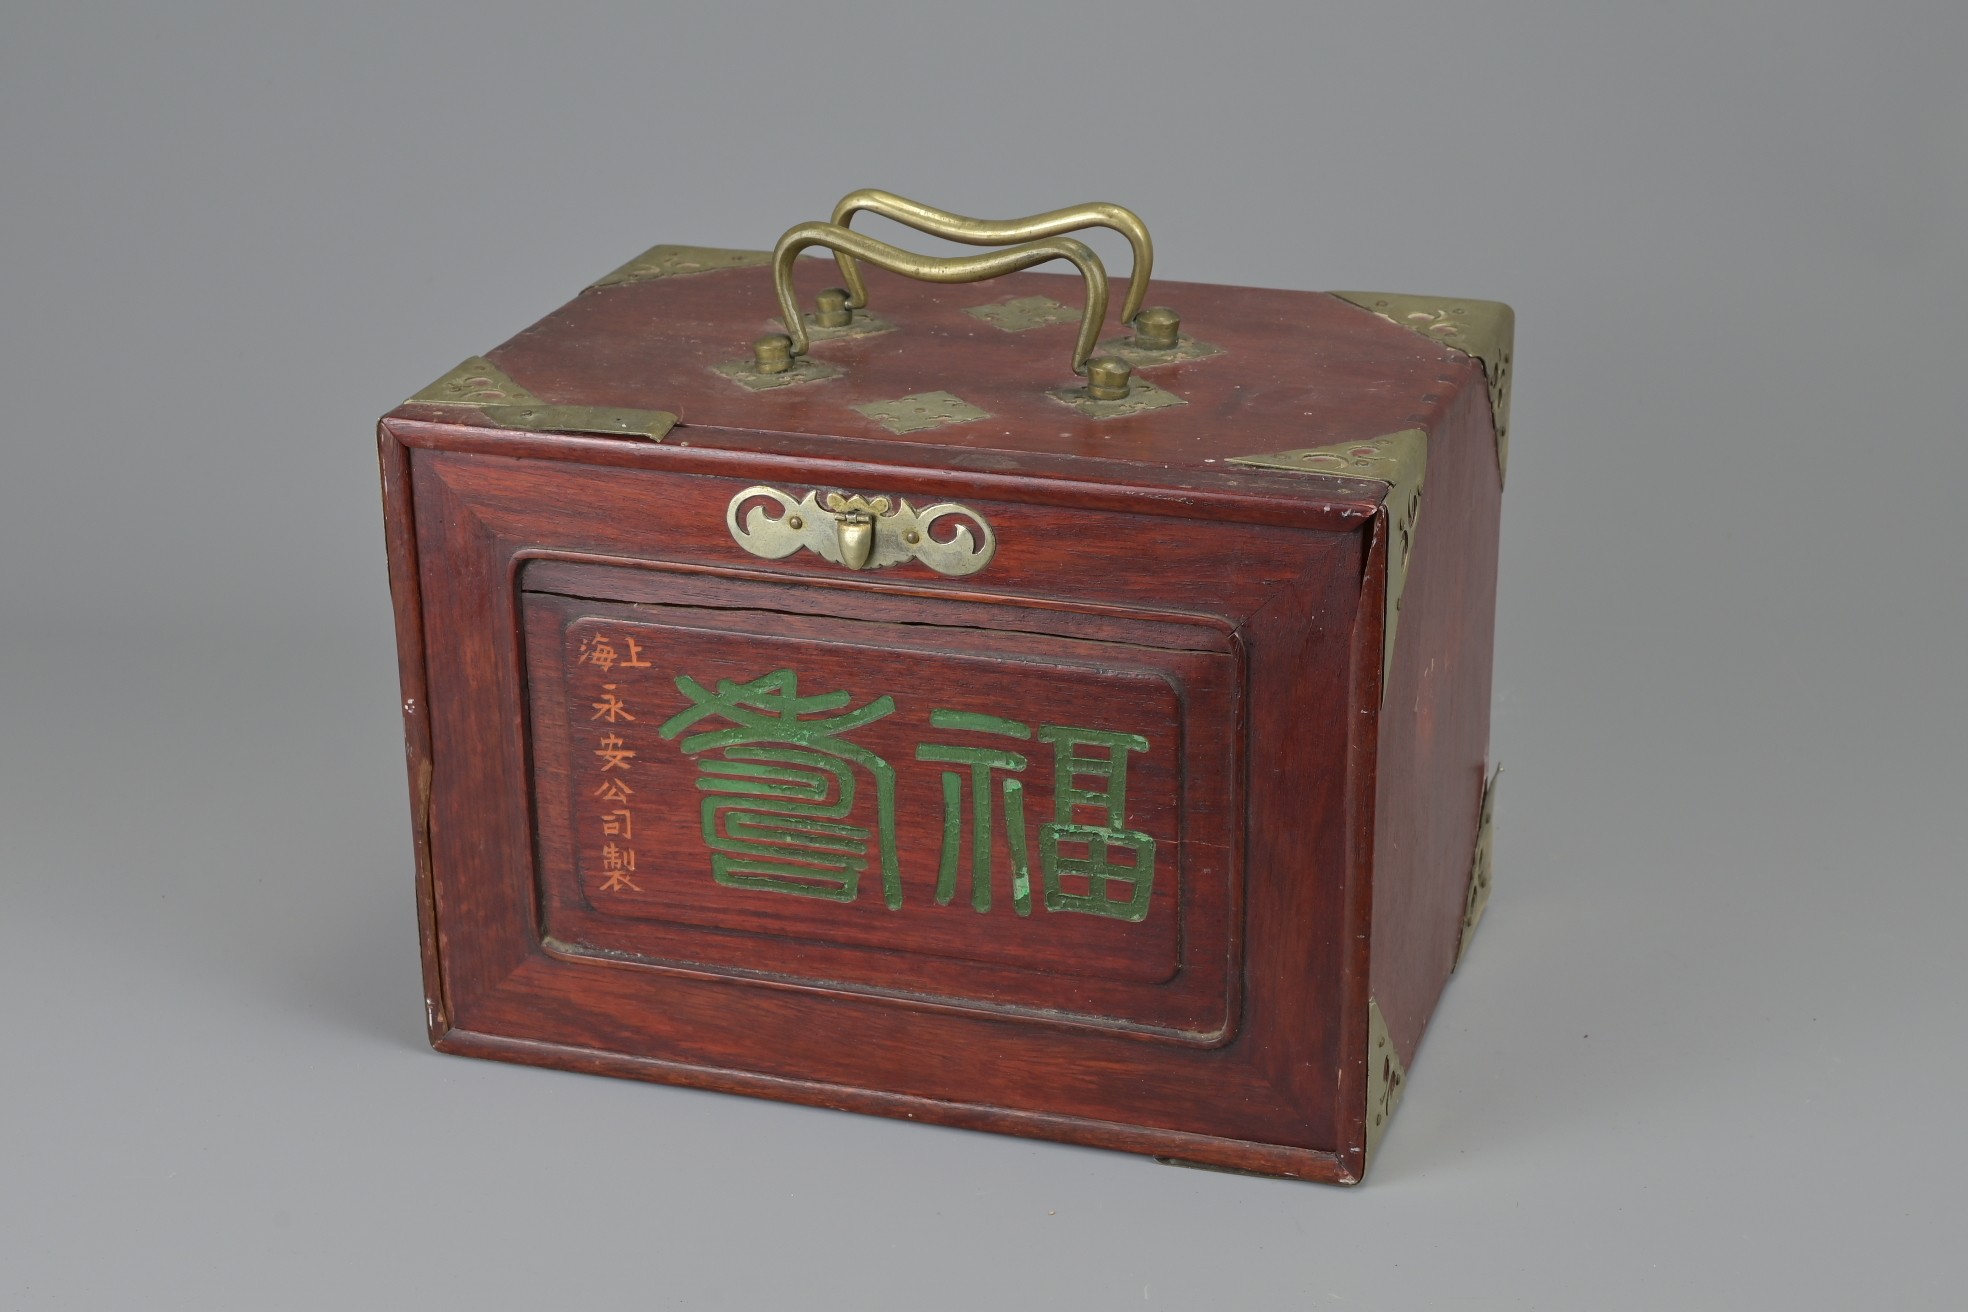 A CHINESE MAHJONG SET, EARLY 20TH CENTURY. Wooden carrying box with brass mounts and handle, - Image 4 of 4